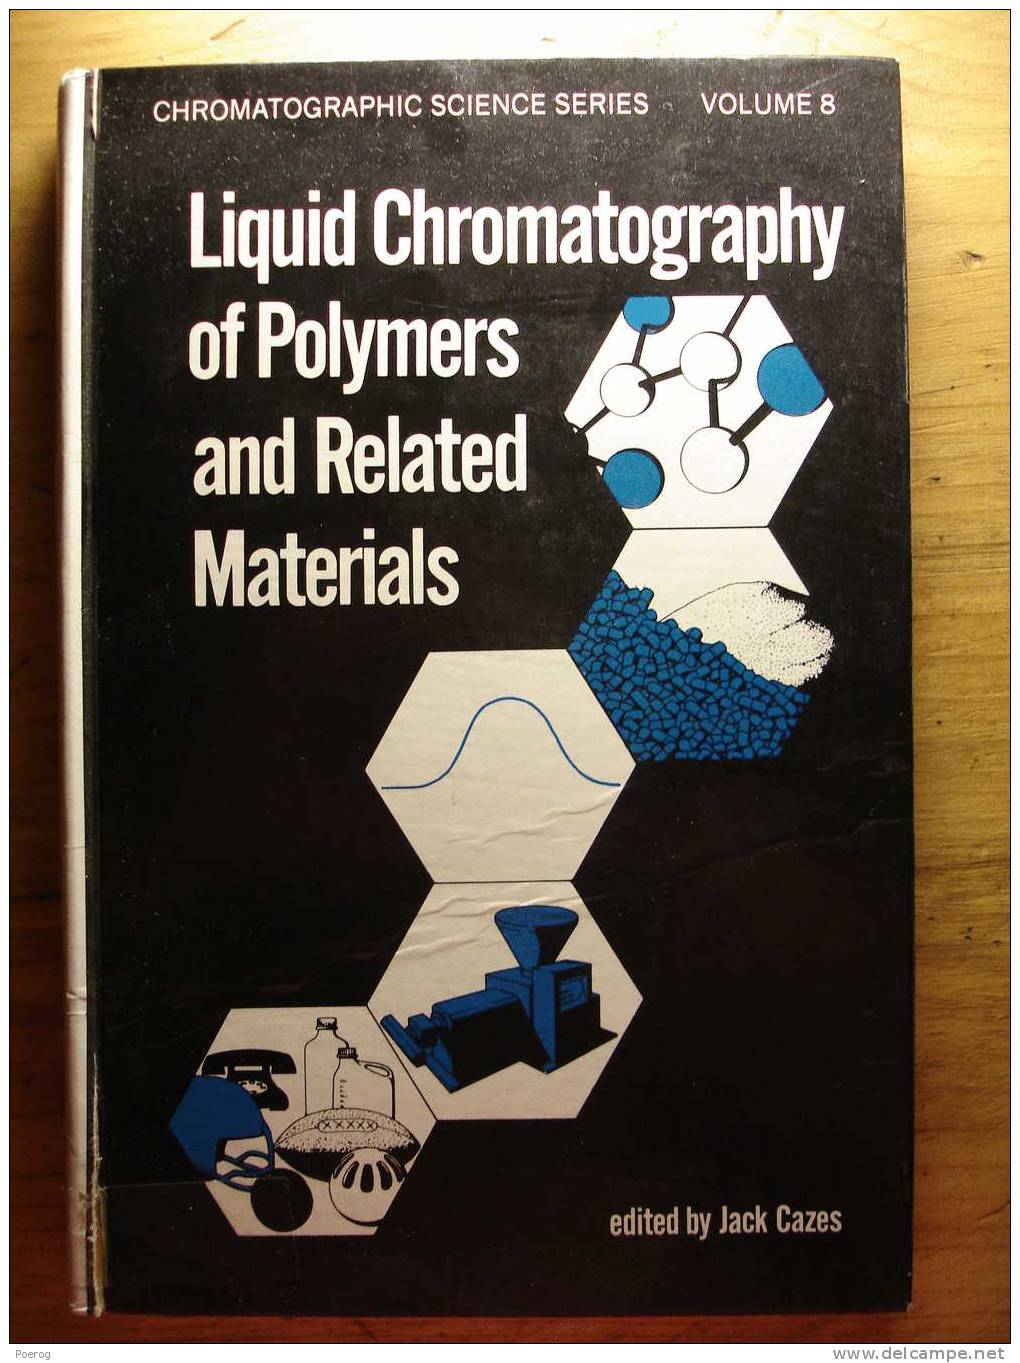 LIQUID CHROMATOGRAPHY OF POLYMERS AND RELATED MATERIALS By JACK CAZES - DEKKER NEW YORK 1977 - Chemistry